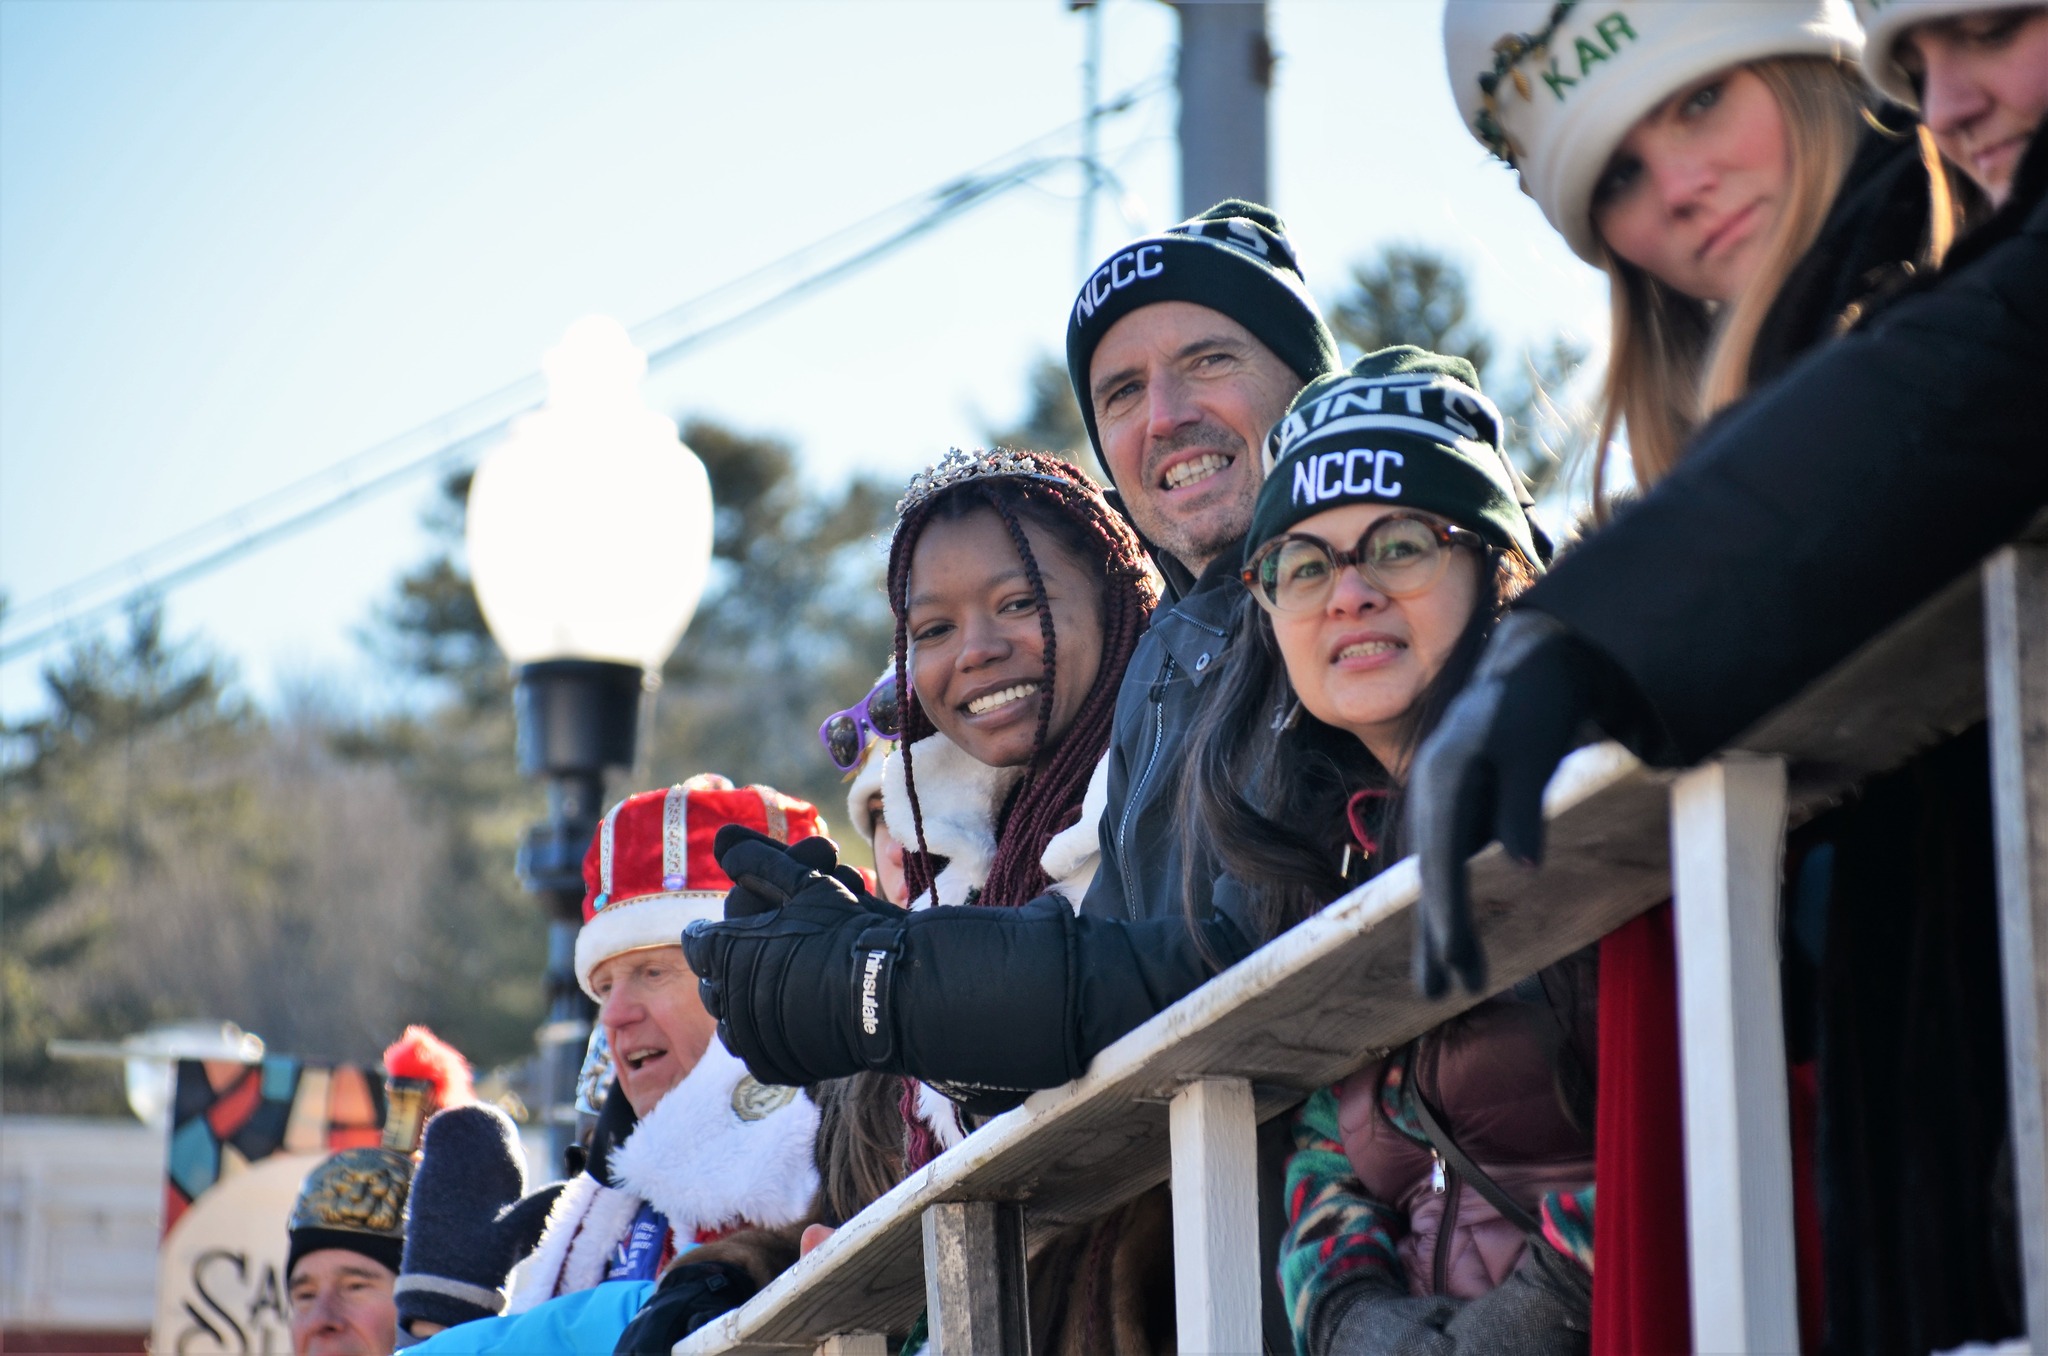 North Country Community College co-sponsored the 2023 Saranac Lake Winter Carnival gala parade.